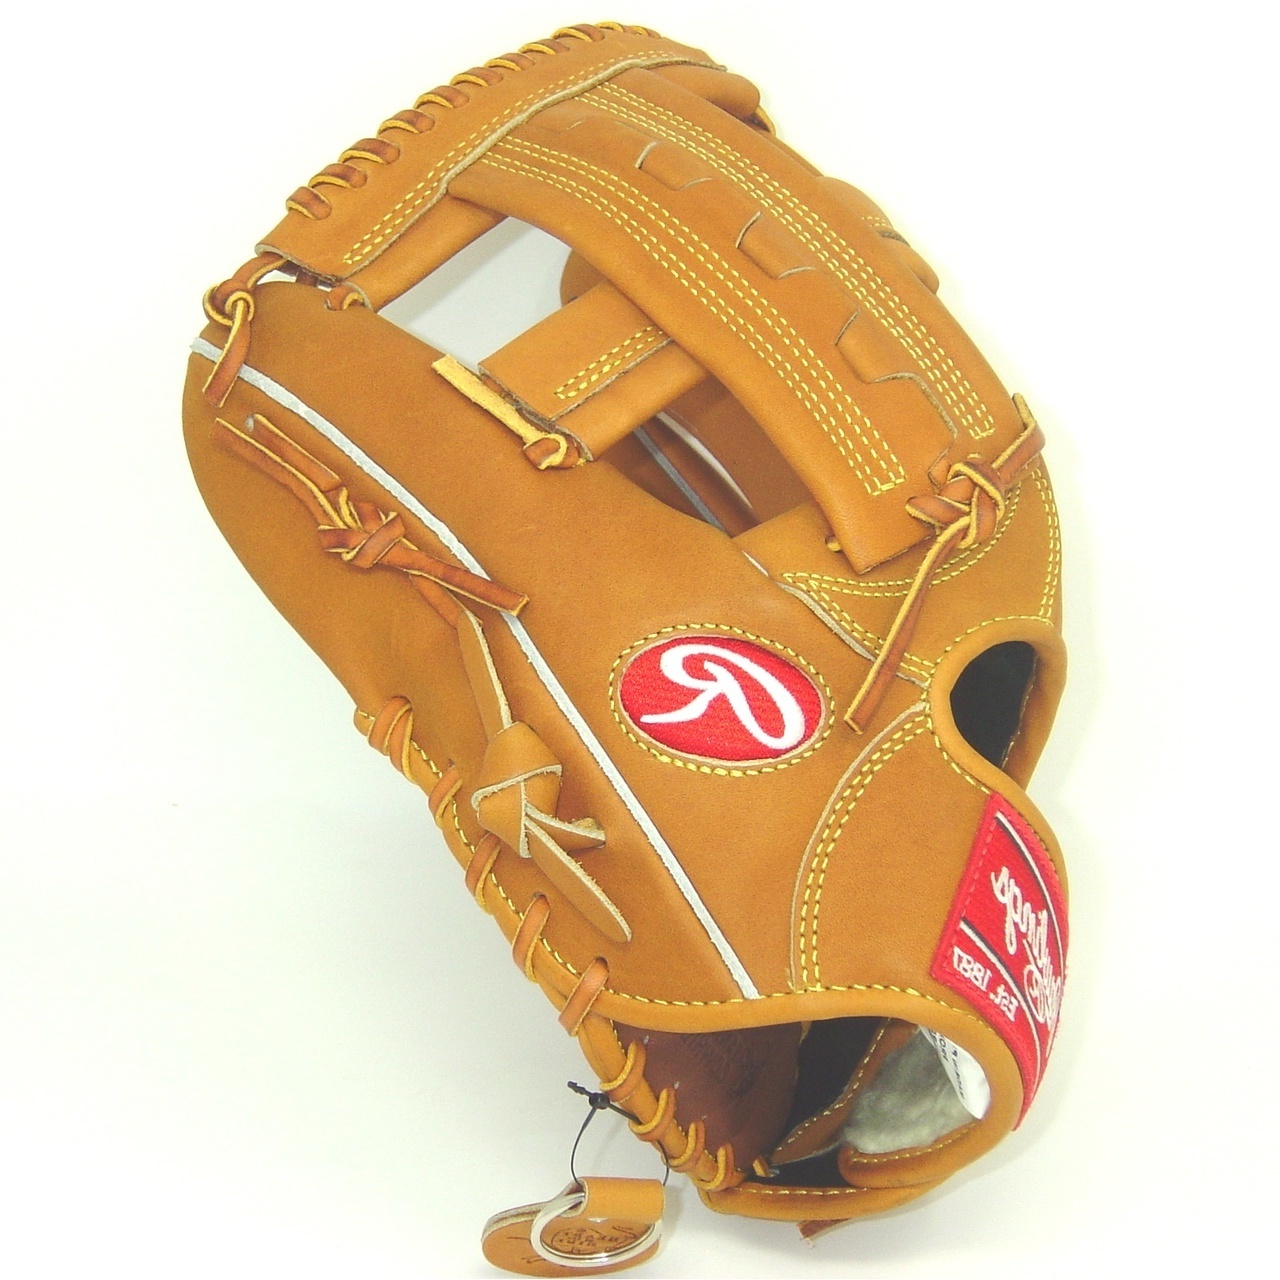 Left Hand Throw Rawlings Ballgloves.com exclusive PRORV23 worn by many great third baseman including Robin Ventura. Made with Japanese tanned Heart of Hide leather. Stiff with break in needed. 12.25 inch pattern and Single Post I Web makes this glove a excellent third base mitt. Deer tanned cowhide inside lining and no palm pad. Made in the Phillipines. This Rawlings baseball glove is a pro model with pro performance. World renowed Heart of the Hide leather for unmatched durability. Crafted from authentic Rawlings Pro patterns. Produced by the world finest Rawlings glove technicians. Soft full grain leather palm and finger back lining provide exemplary comfort. USA tanned leather lacing for durability. Single Post Open Web and Open Back.